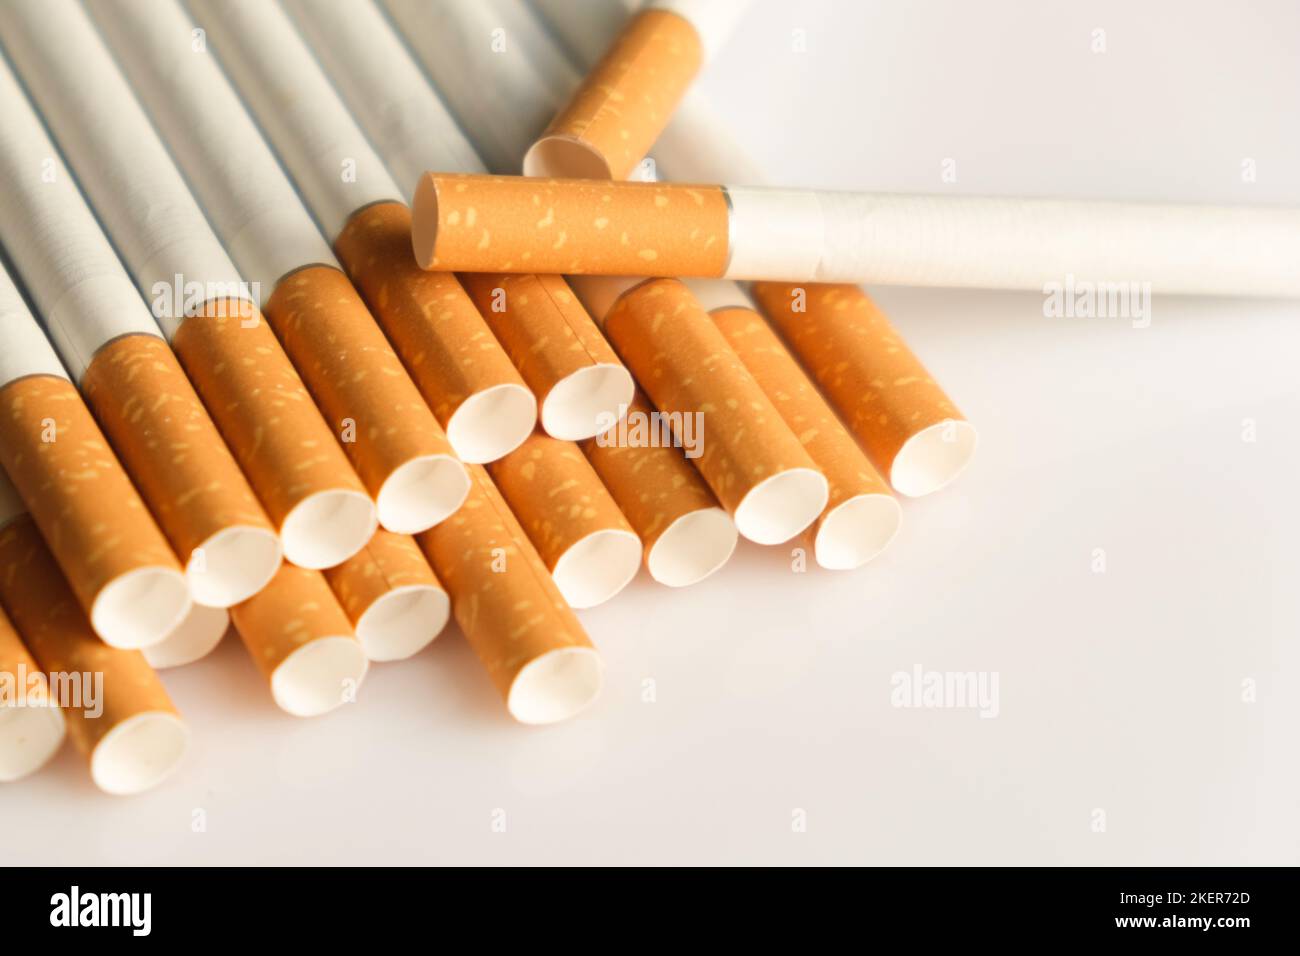 Medicine concept. Cigarettes with a yellow filter lie on a white